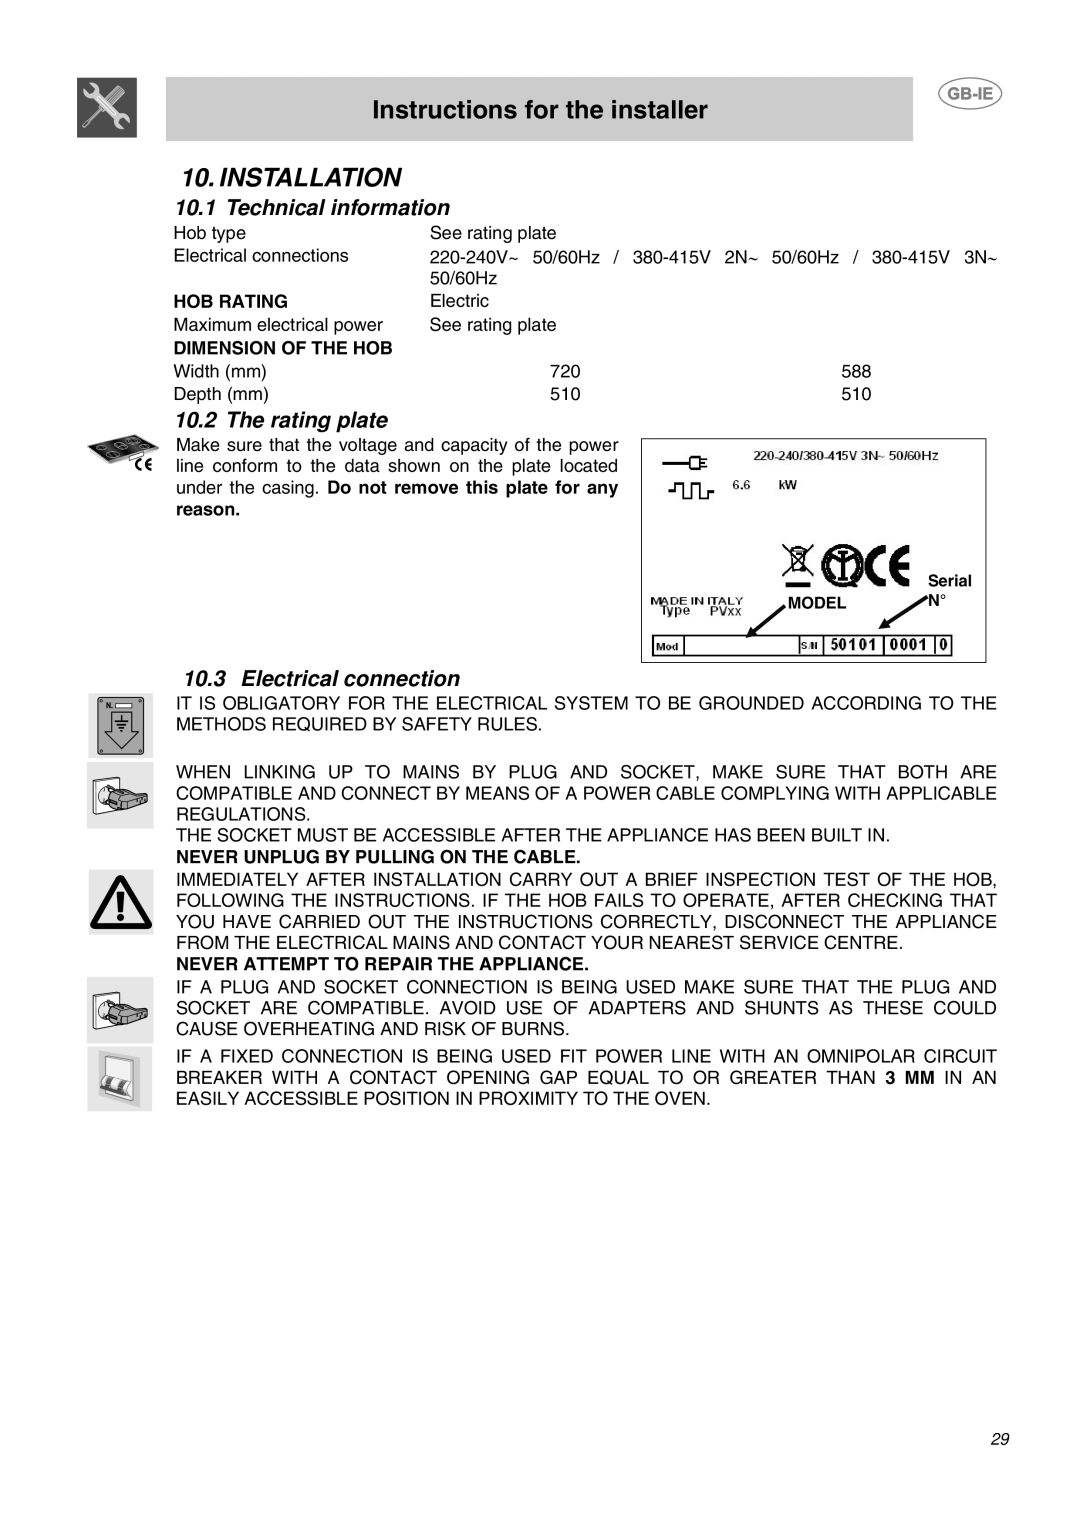 Smeg P652, P662-1, P662B-1 manual Instructions for the installer, Installation, Hob Rating, Dimension Of The Hob 